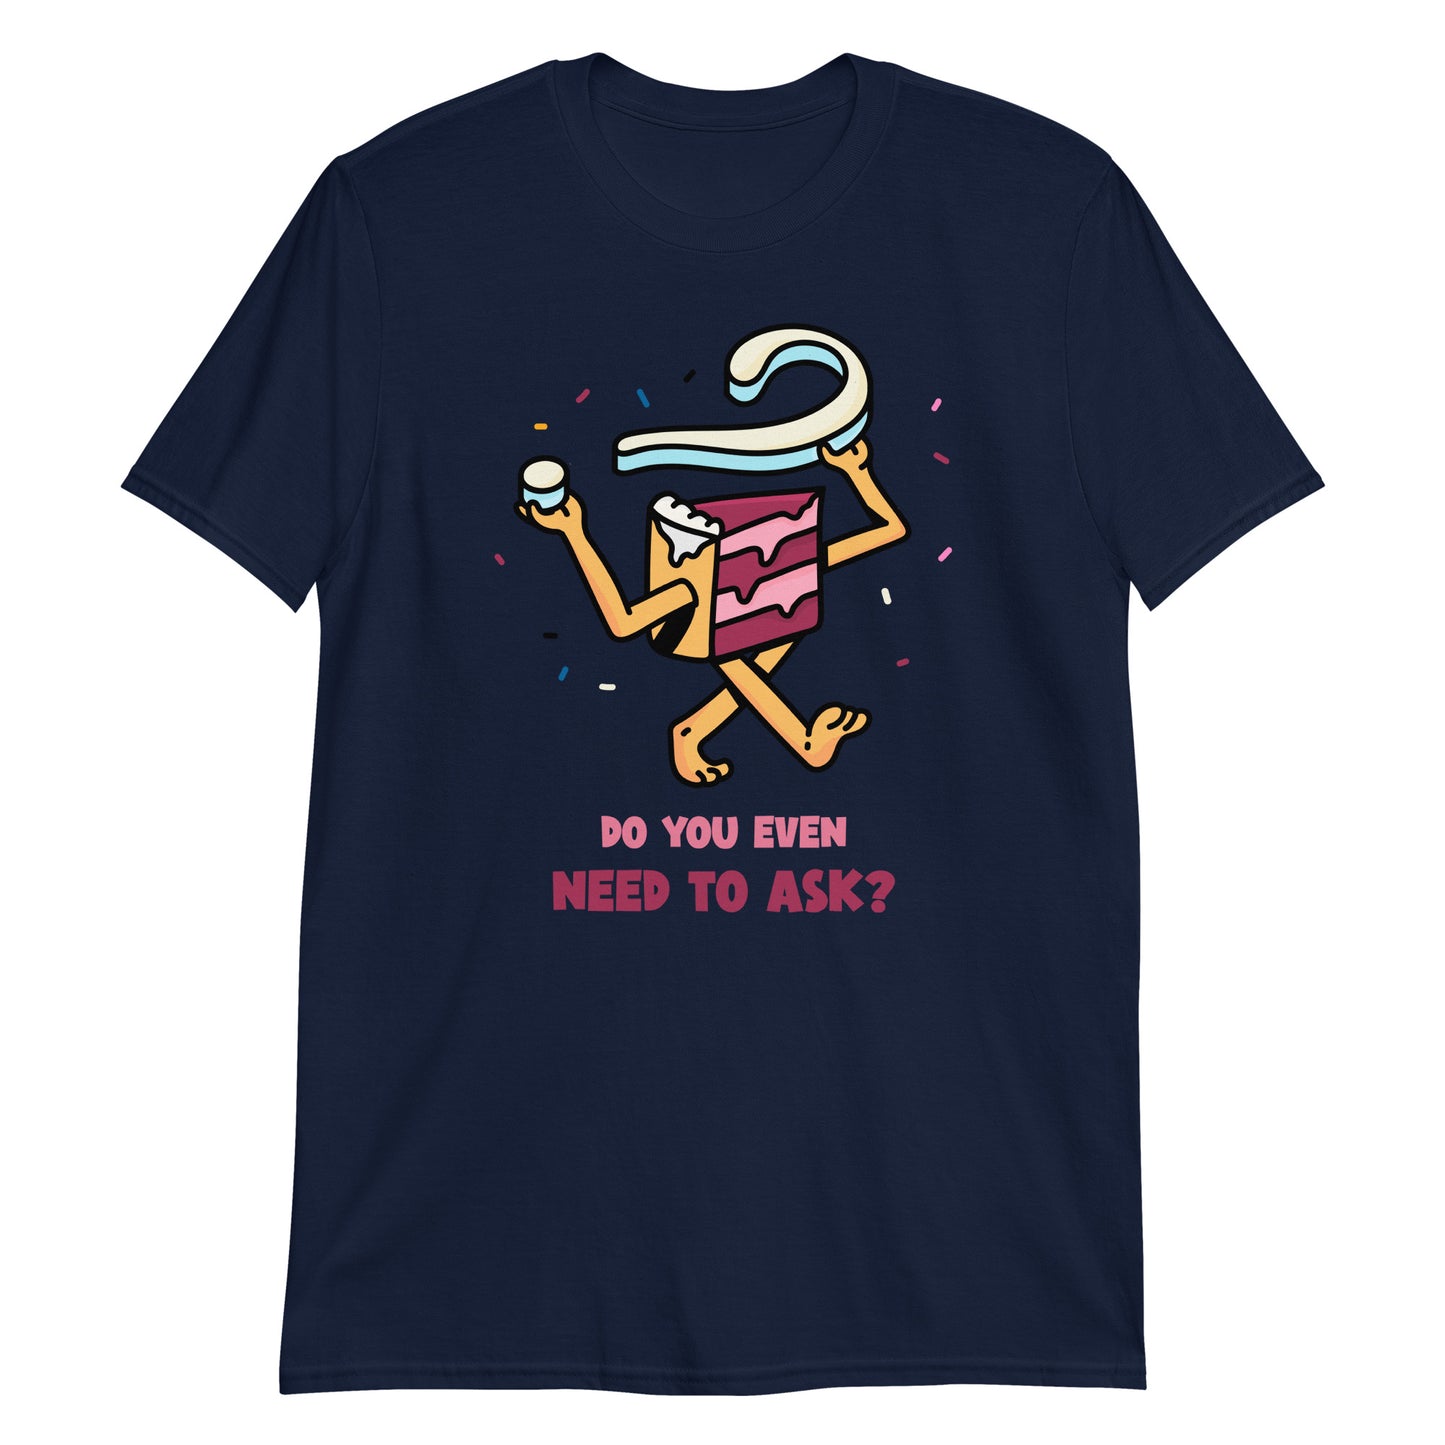 Cake, Do You Even Need To Ask - Short-Sleeve Unisex T-Shirt Navy Unisex T-shirt Food